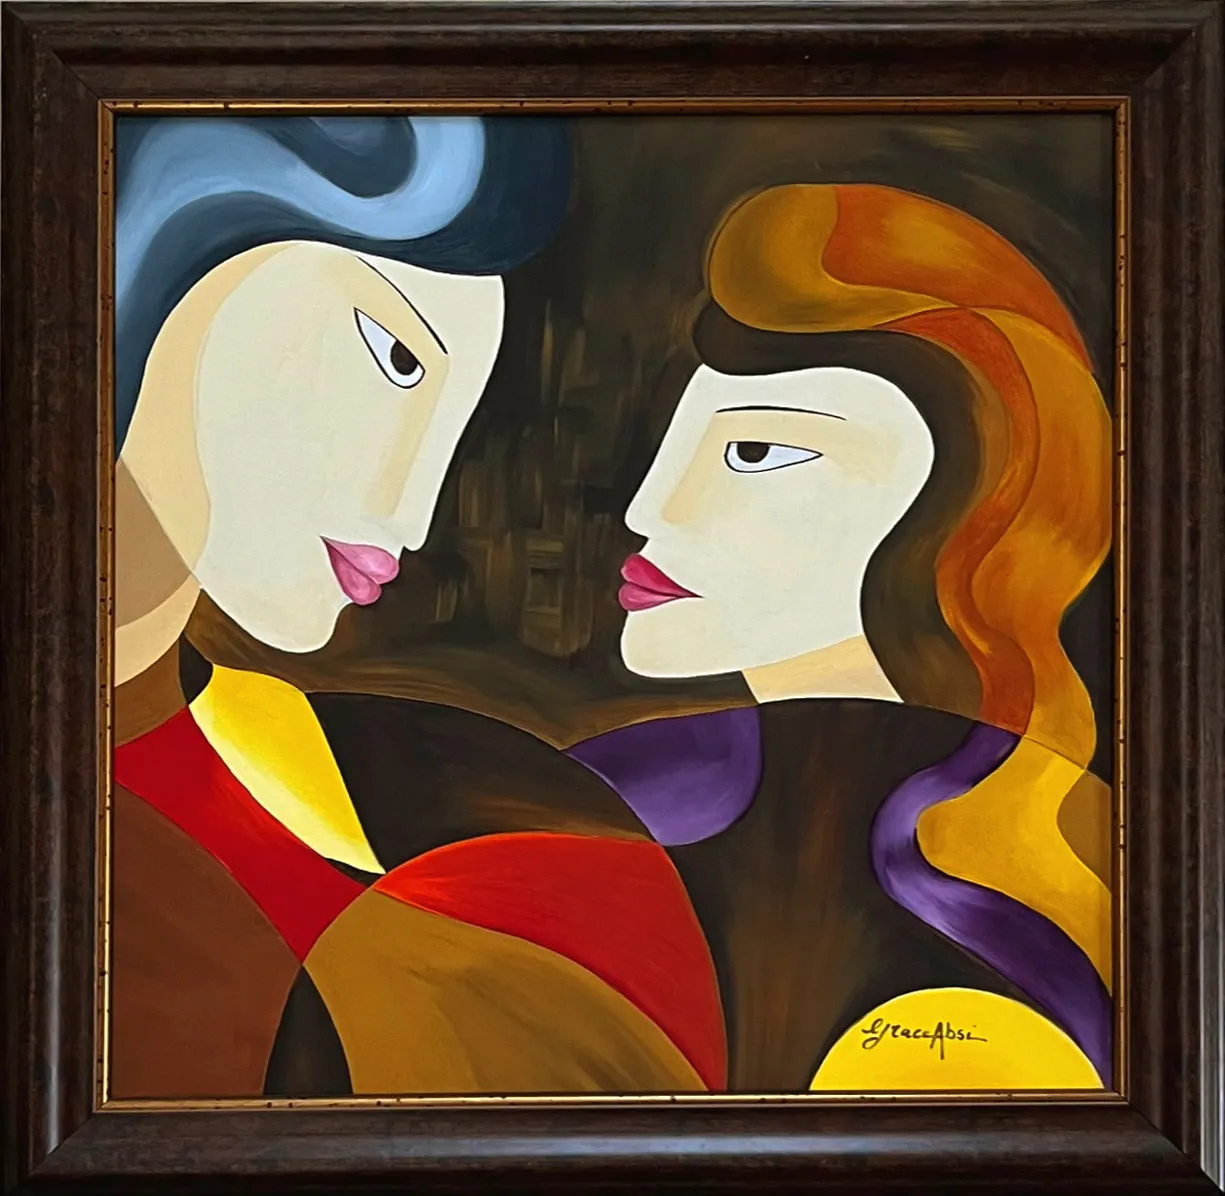 Grace Absi First Date 2001 Oil Painting on Canvas Framed